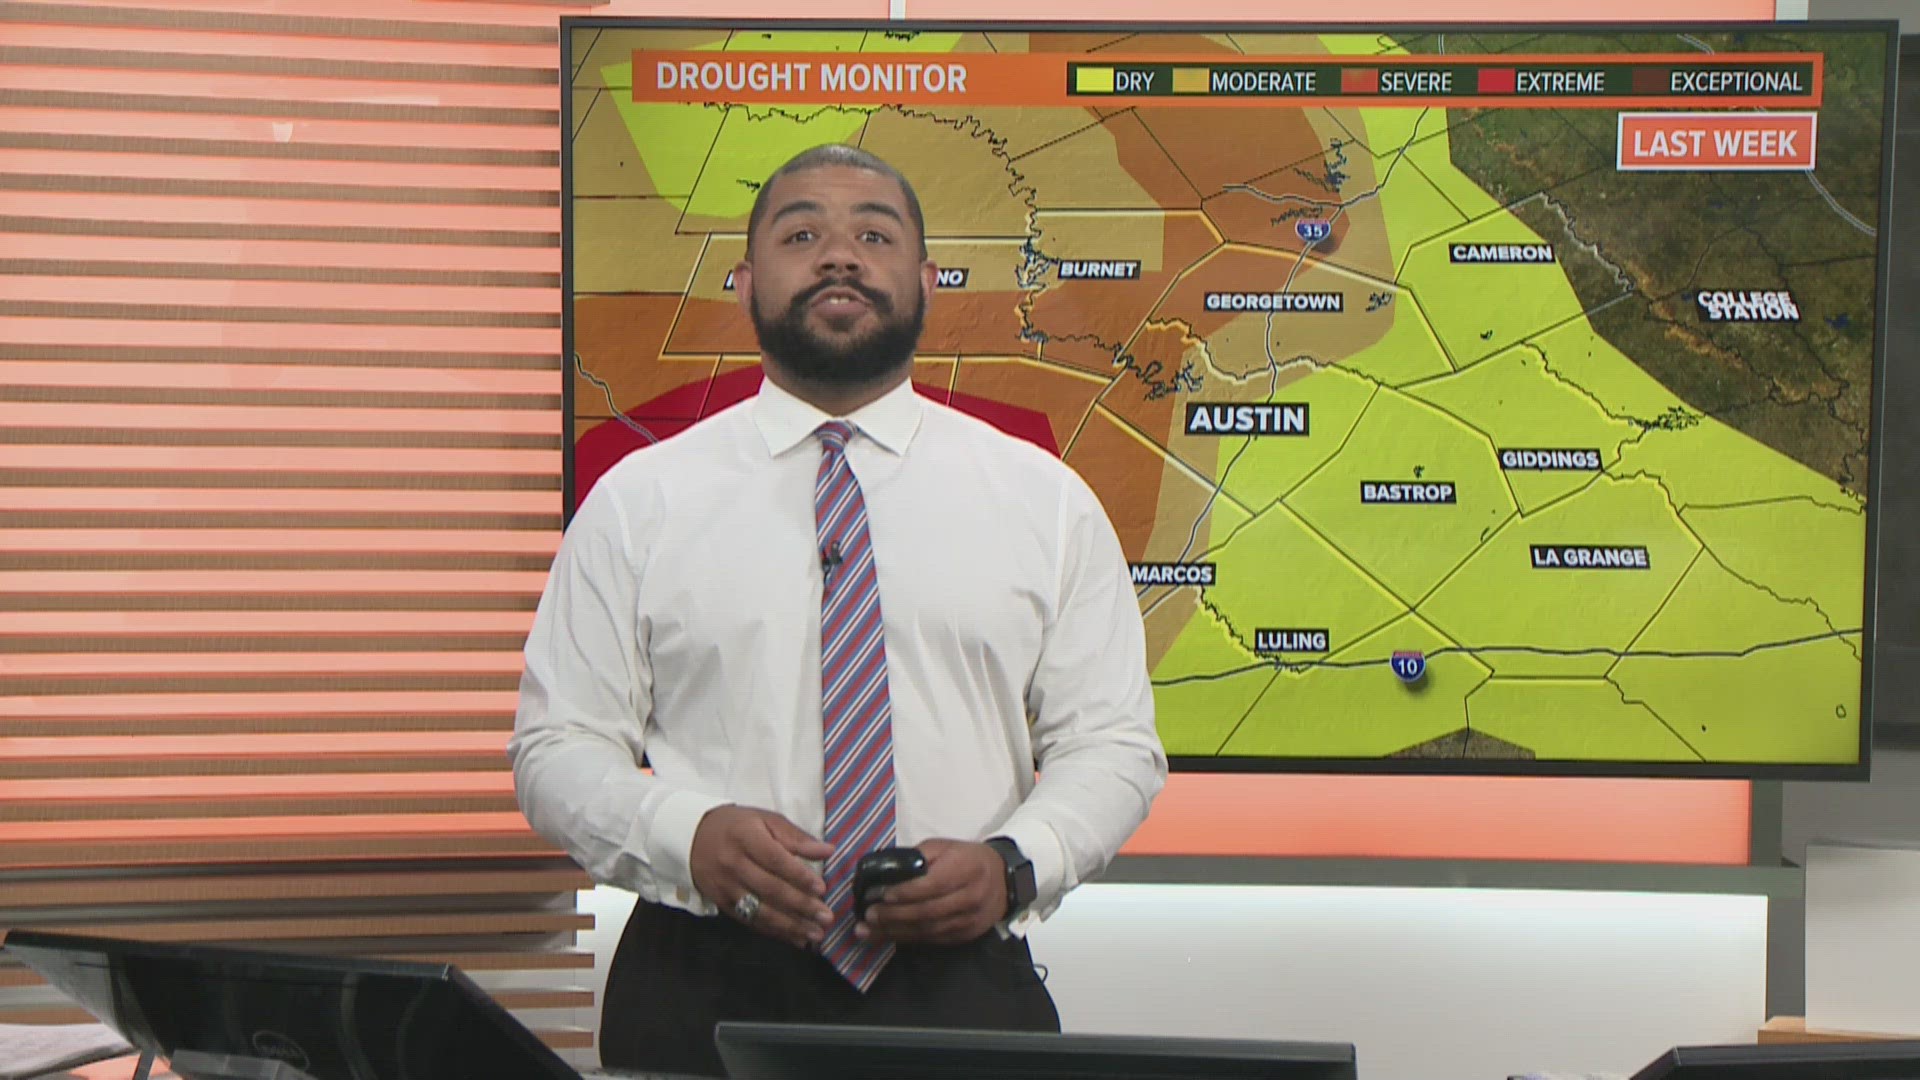 Drought continues to regress across Central Texas.